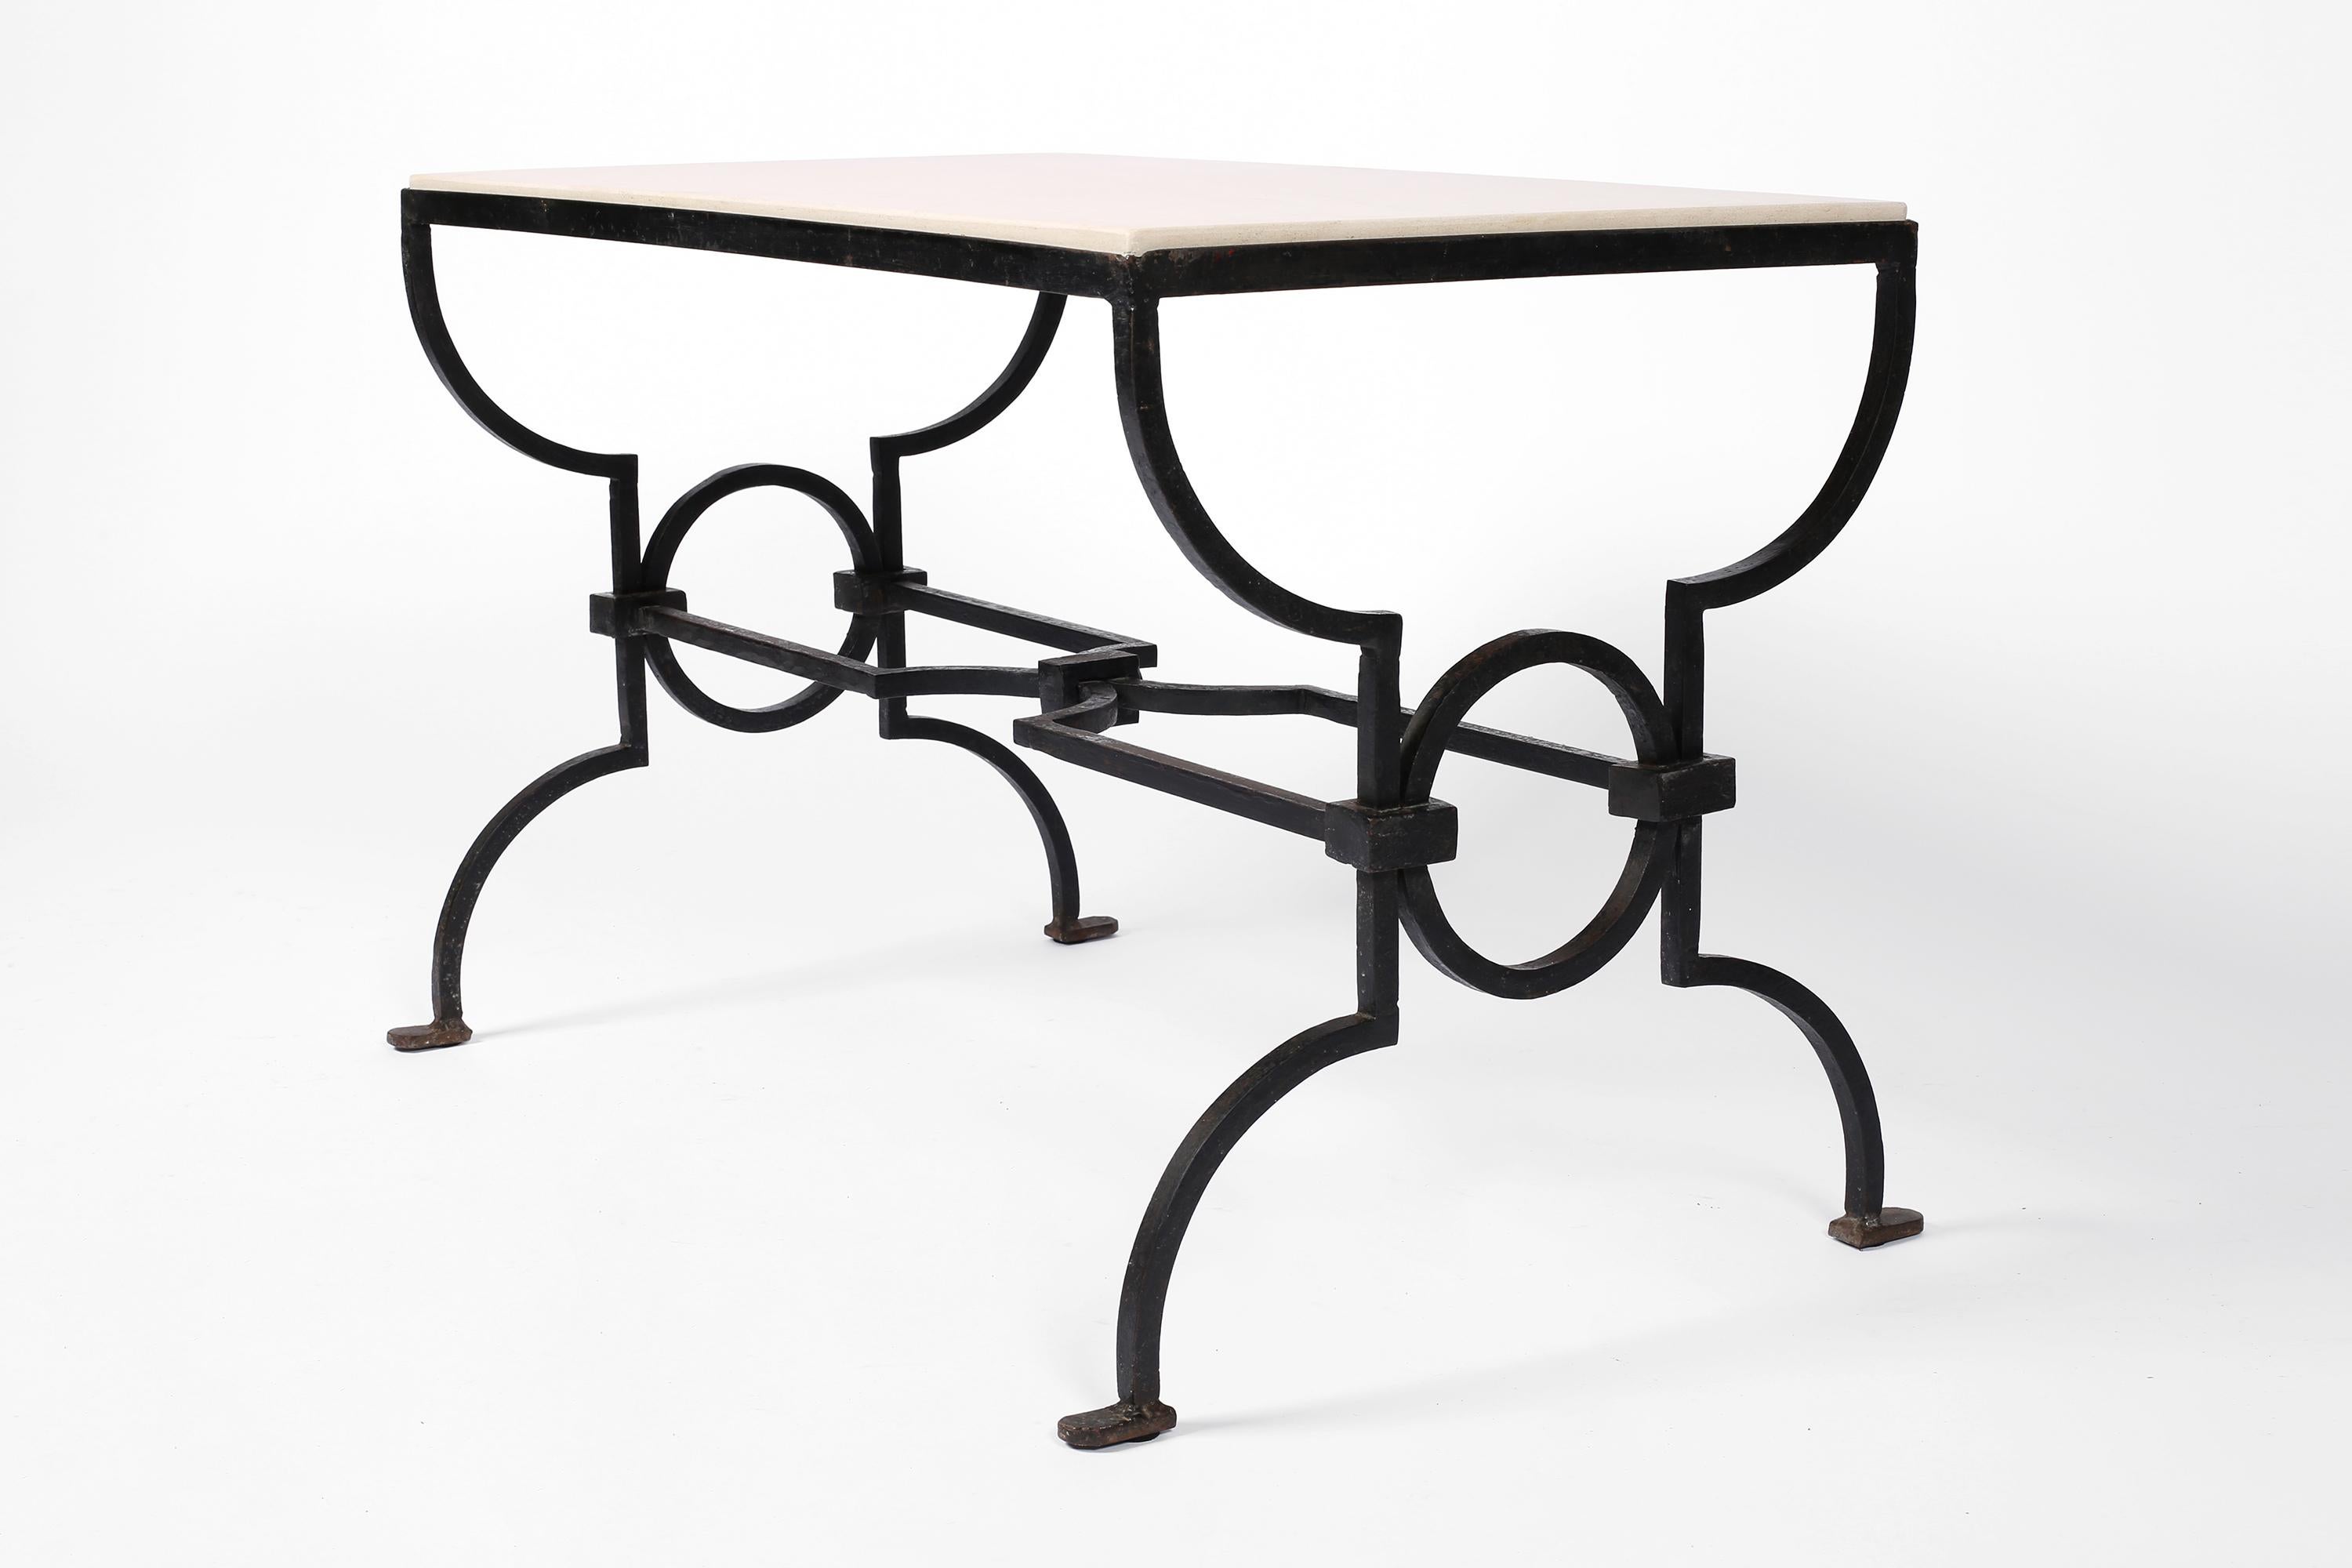 Art Deco French Forged Iron and Limestone Coffee Table by Gilbert Poillerat, c. 1940. For Sale